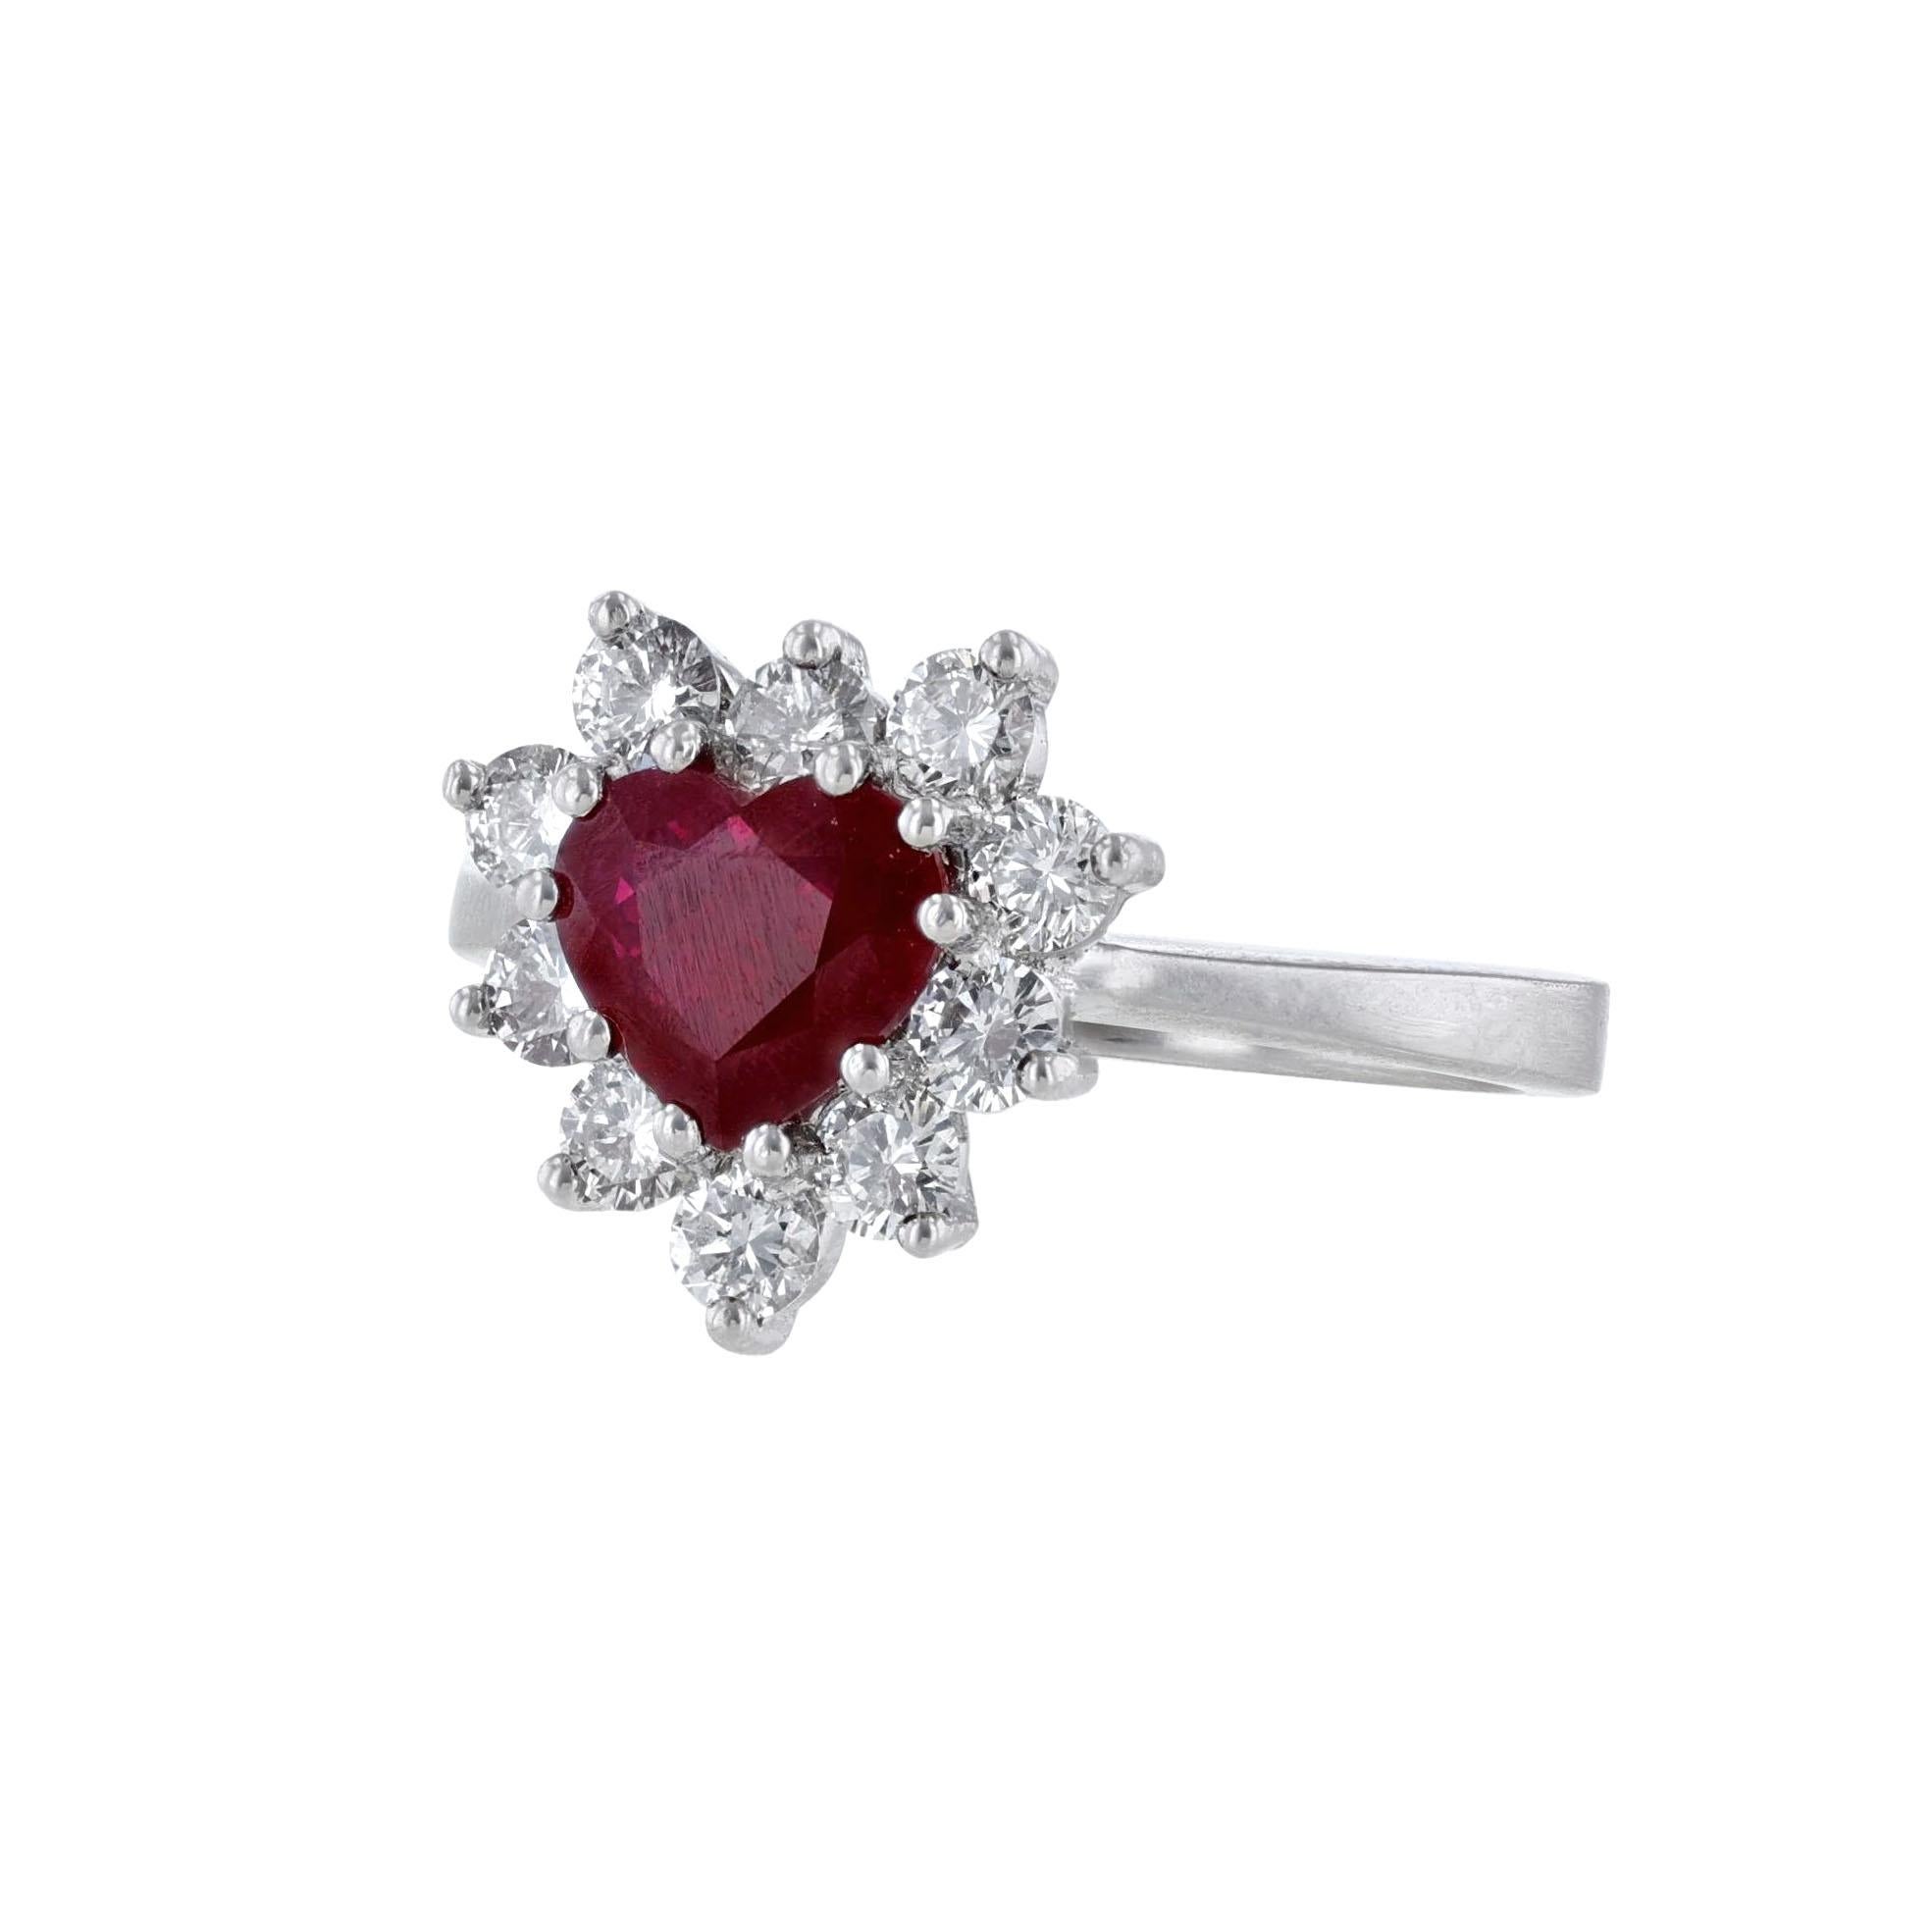 This ring is made in platinum. It features 1 heart-shaped Burma Vivid Red Ruby weighing 1.44 carat. The stone is GIA certified with GIA 6201265626. With a halo of 10 round cut diamonds weighing 0.83 carats. With a color grade (H) and clarity grade